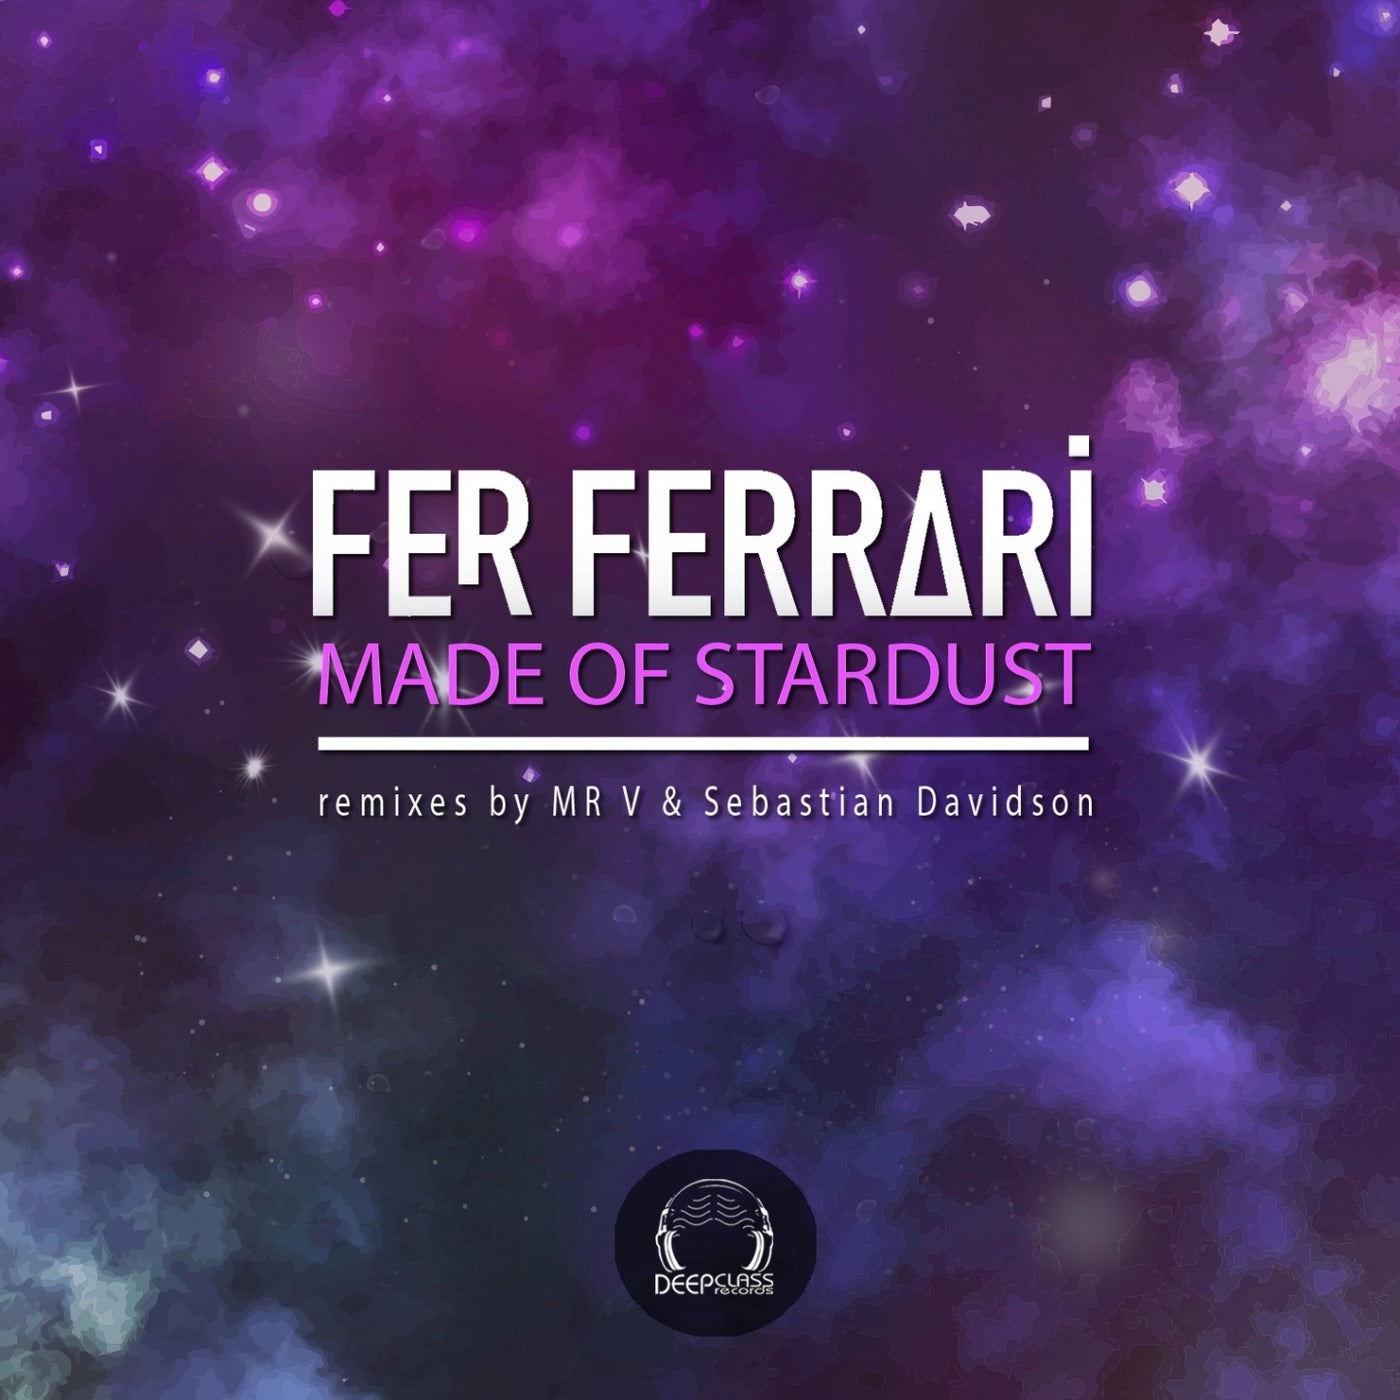 Made of Stardust EP